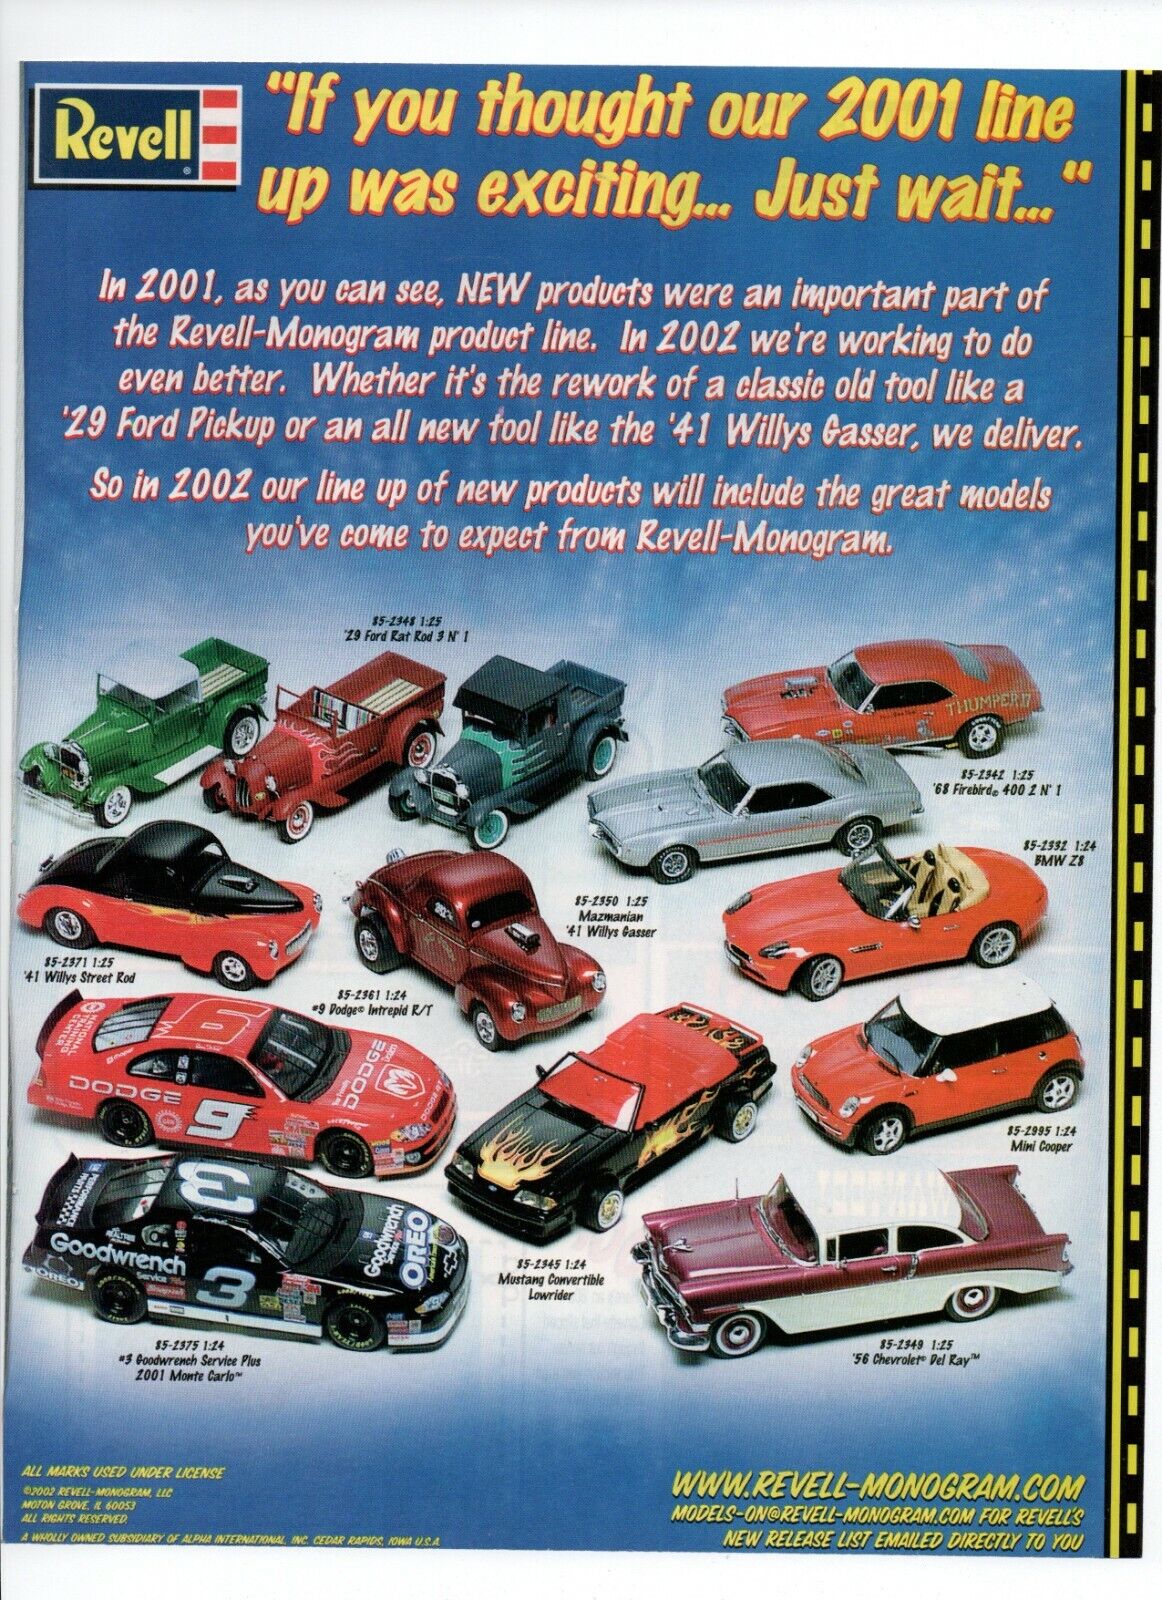 Revell '29 Ford Pickup '41 Willys Gasser Model Diecast Cars - 2002 Toys Print Ad